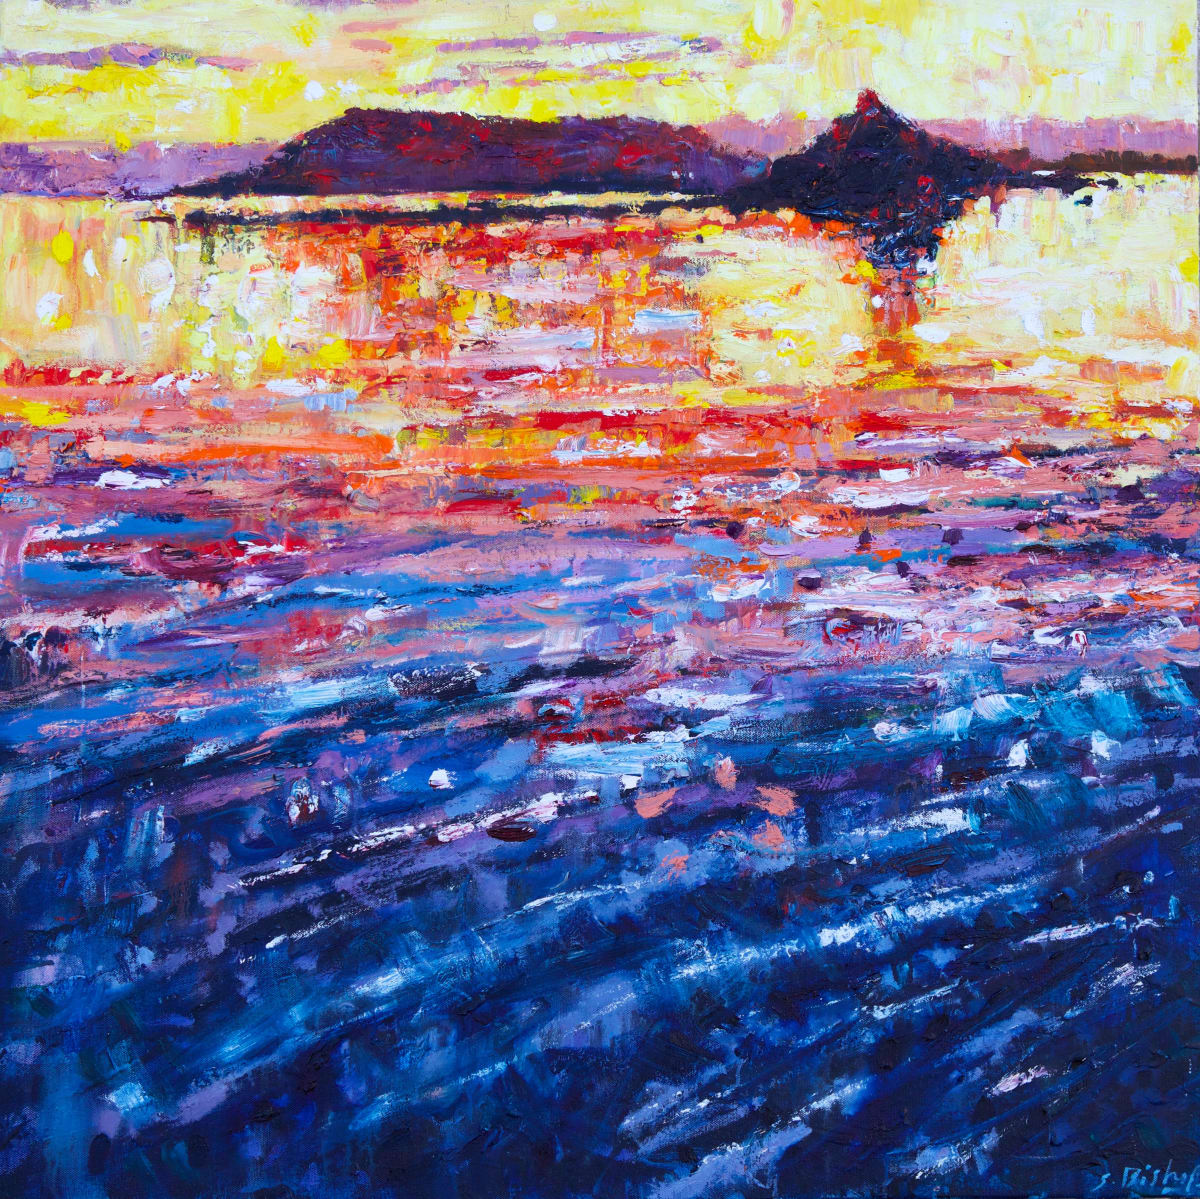 Light Within and Without by Stephen Bishop  Image: Available from Gallery Tresco 

https://www.tresco.co.uk/enjoying/gallery-tresco/artists/stephen-bishop